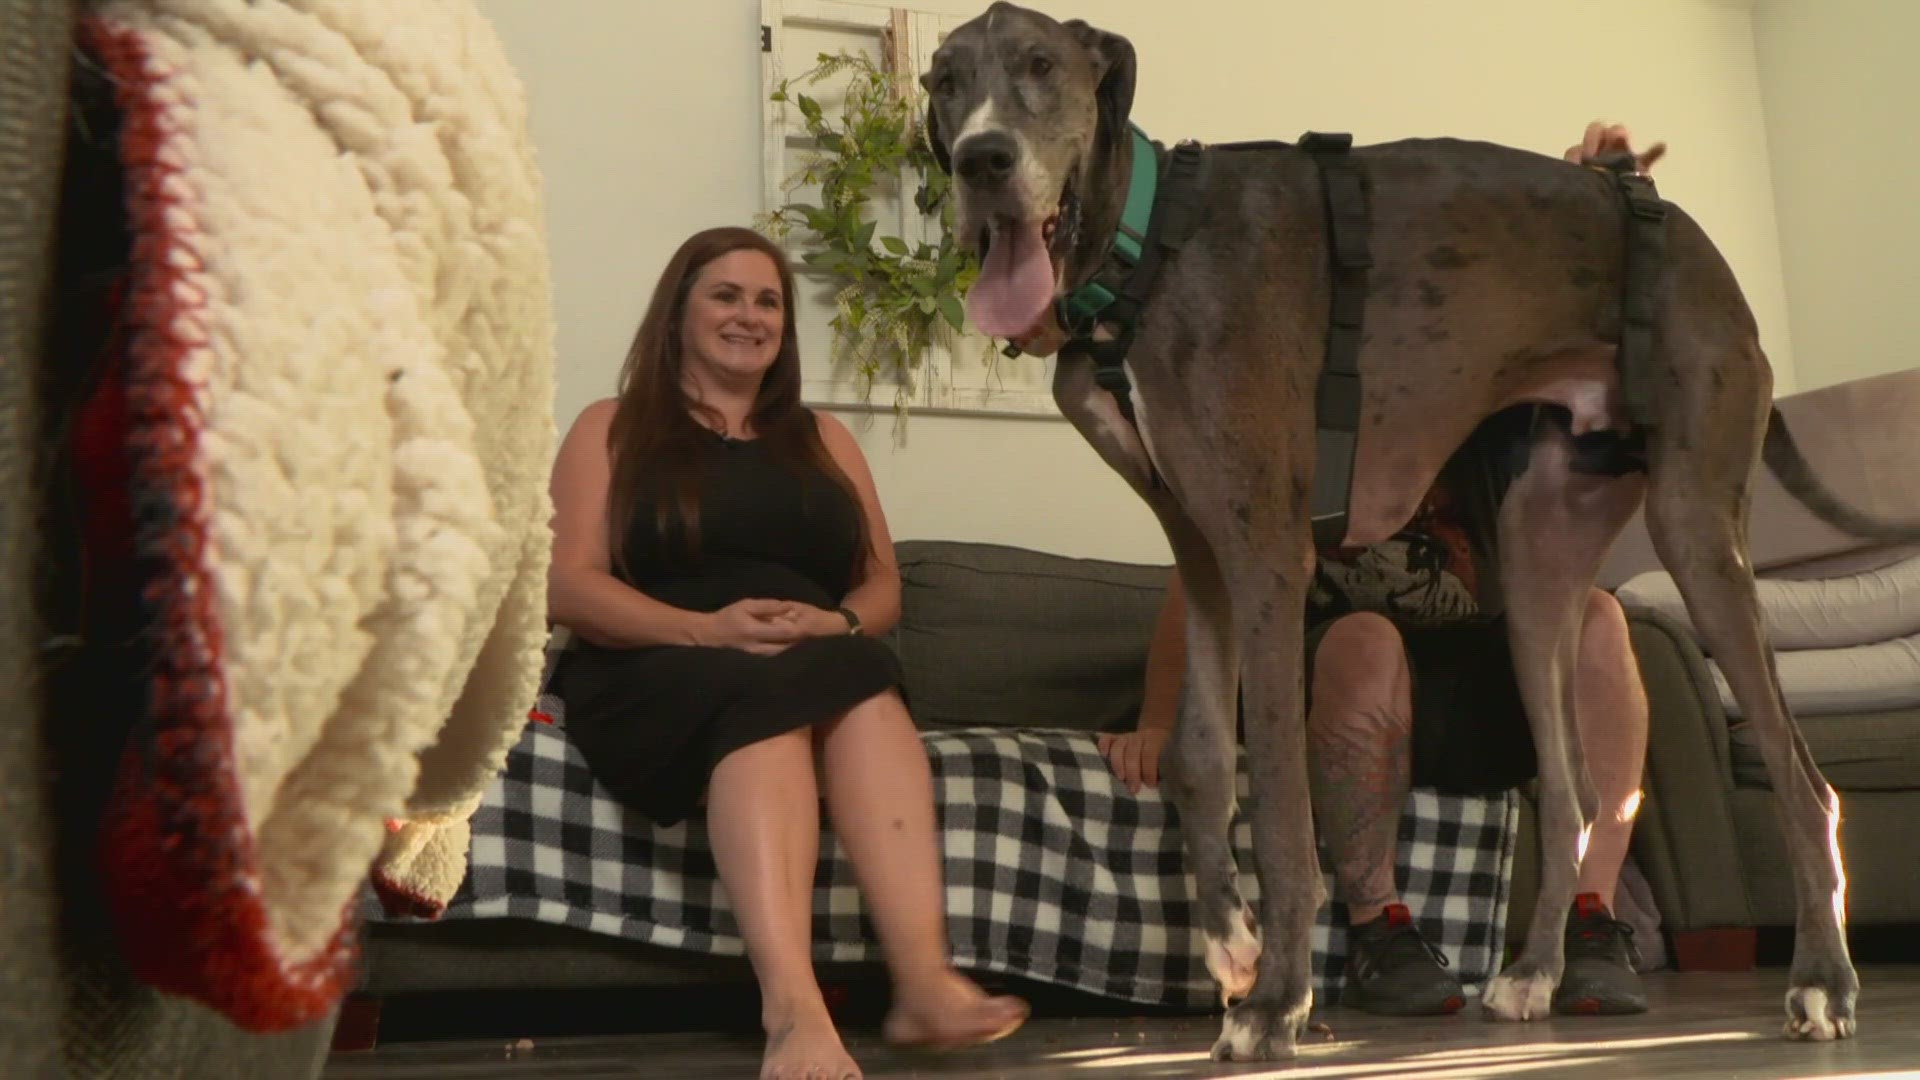 "We don't want him to hurt anymore," said Zeus's owner, Brittany Davis. The Fort Worth Great Dane developed bone cancer on his front leg.